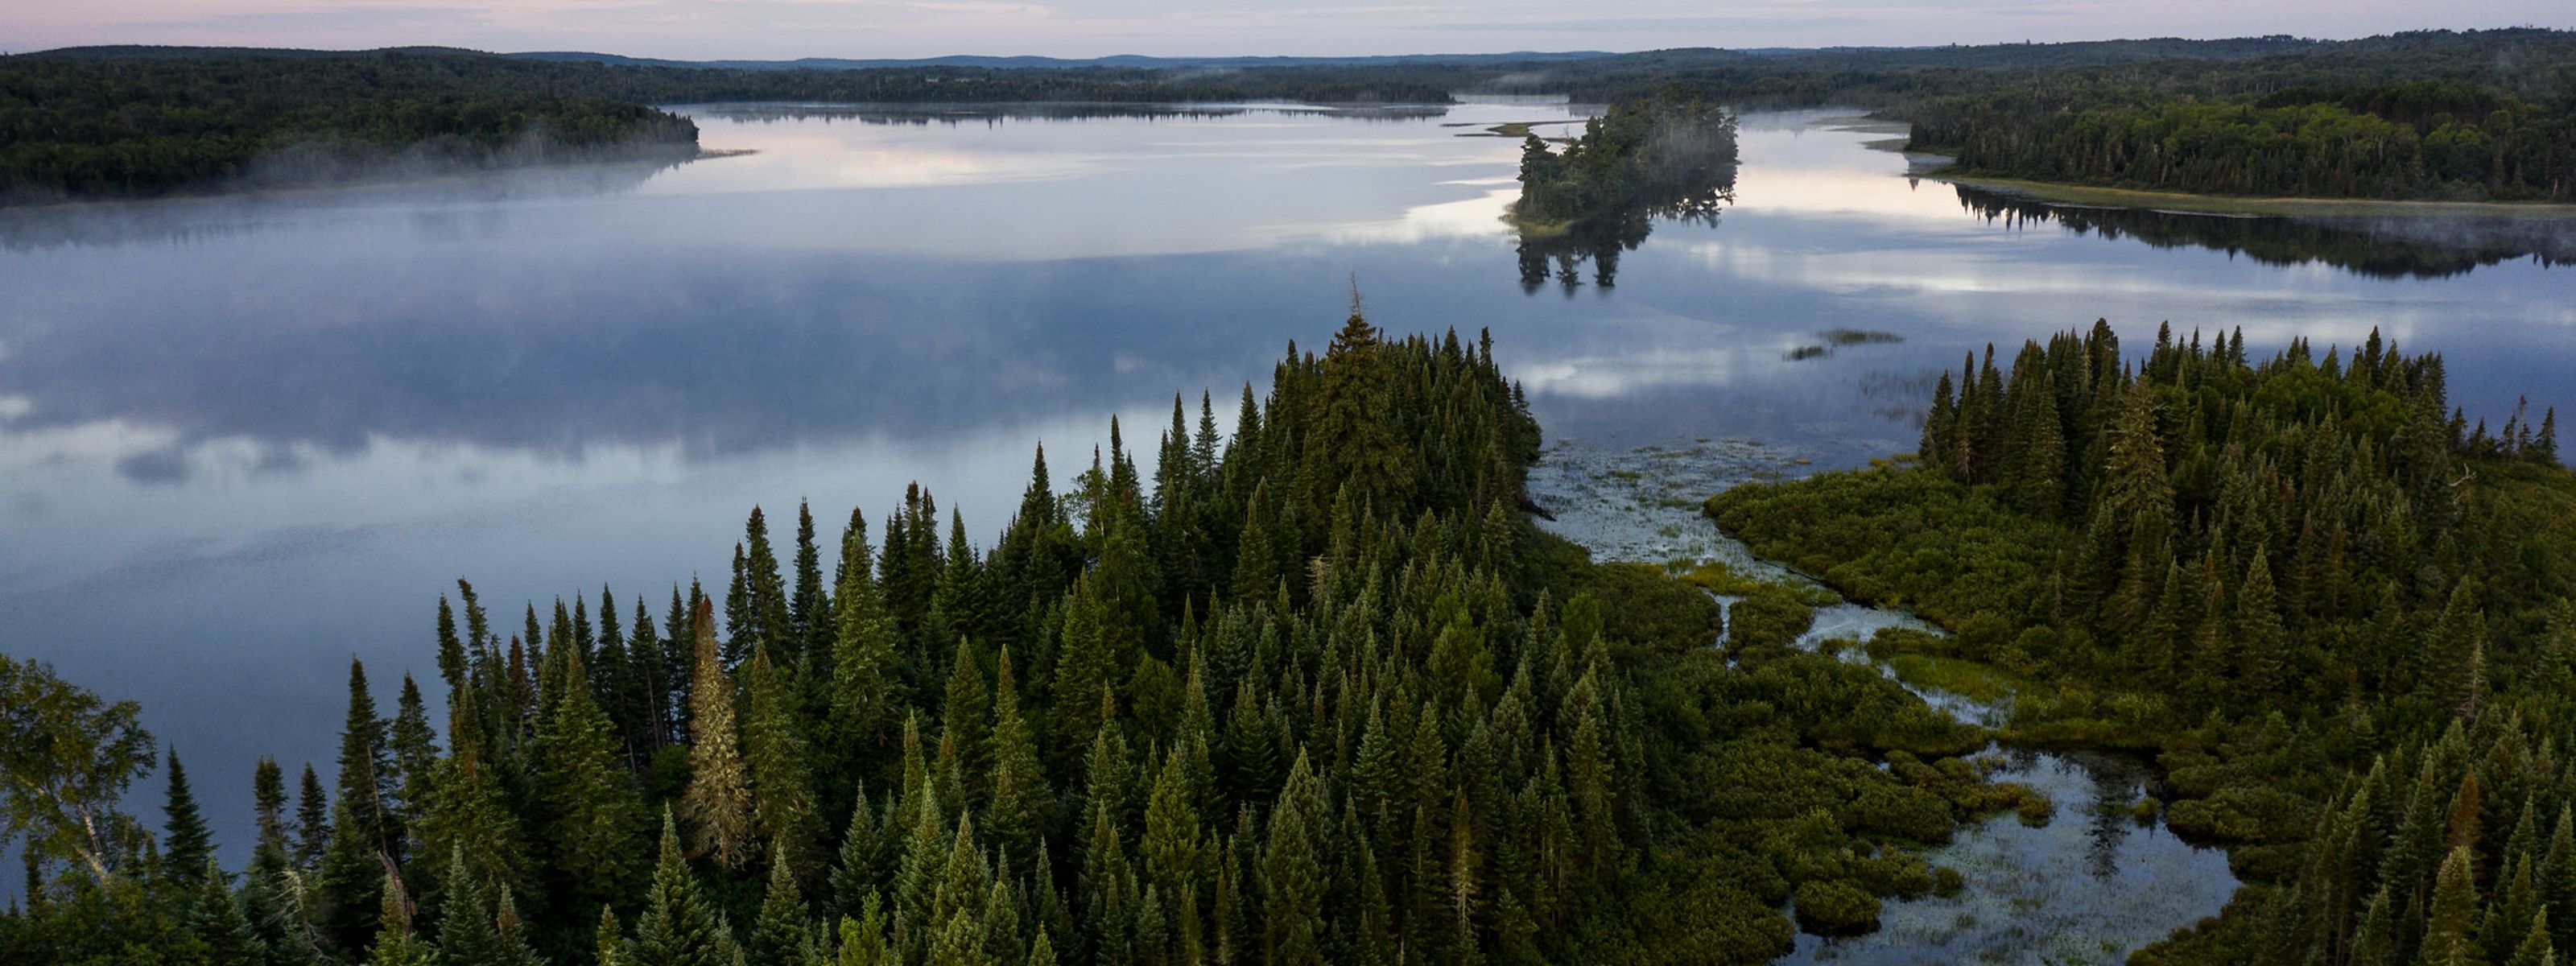 Aerial view of an undeveloped freshwater lake surrounded by forest.